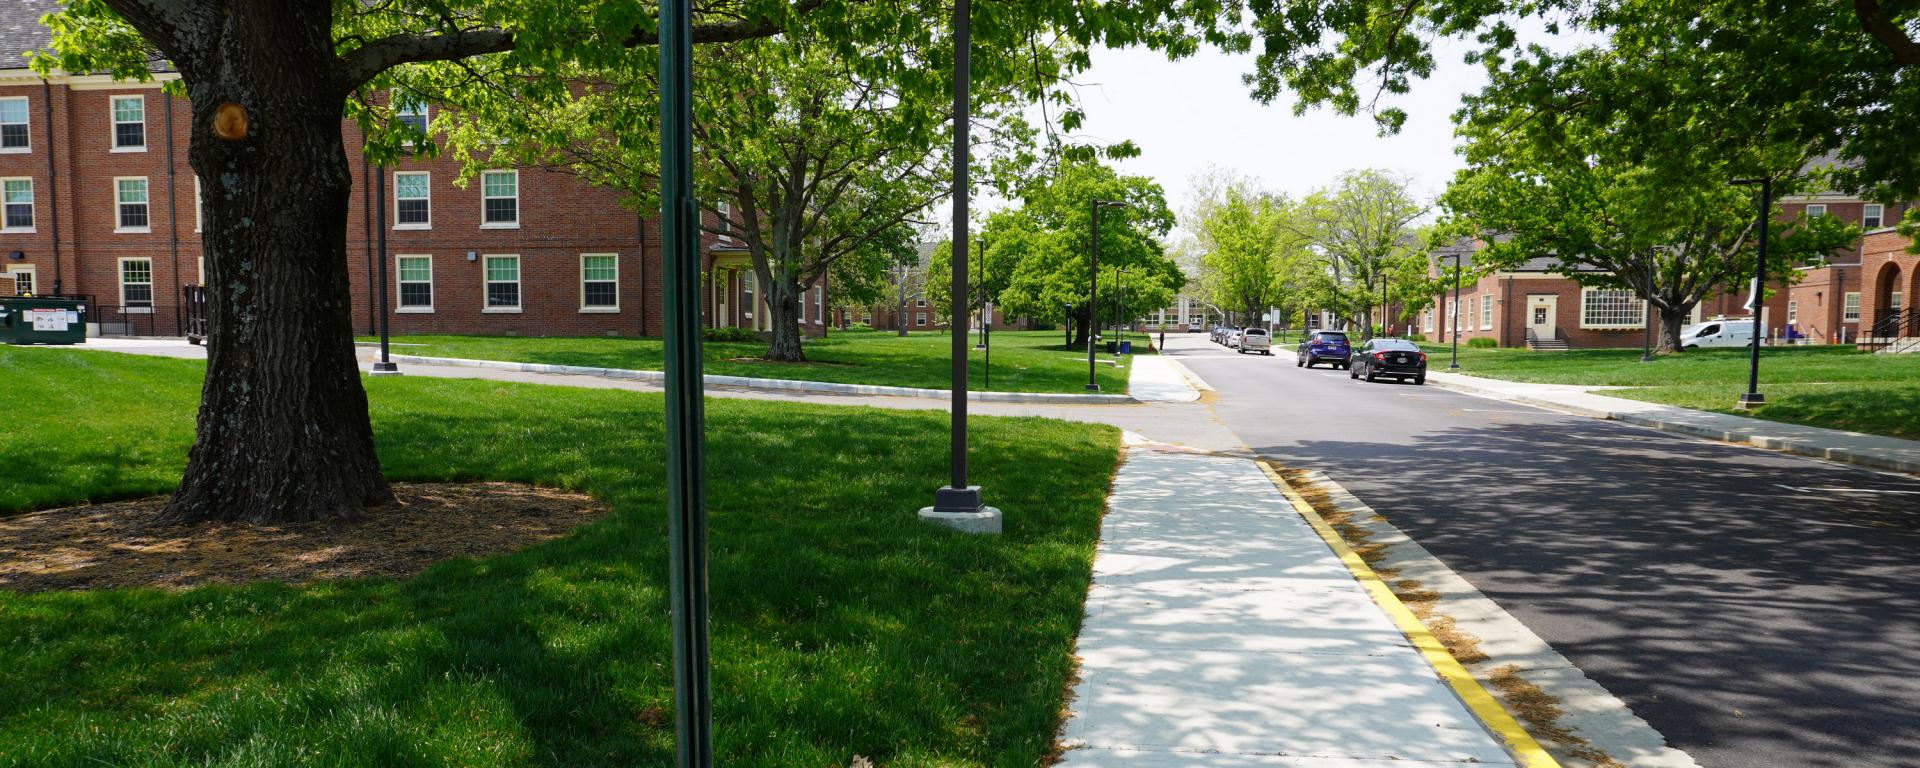 new street with sidewalk and trees